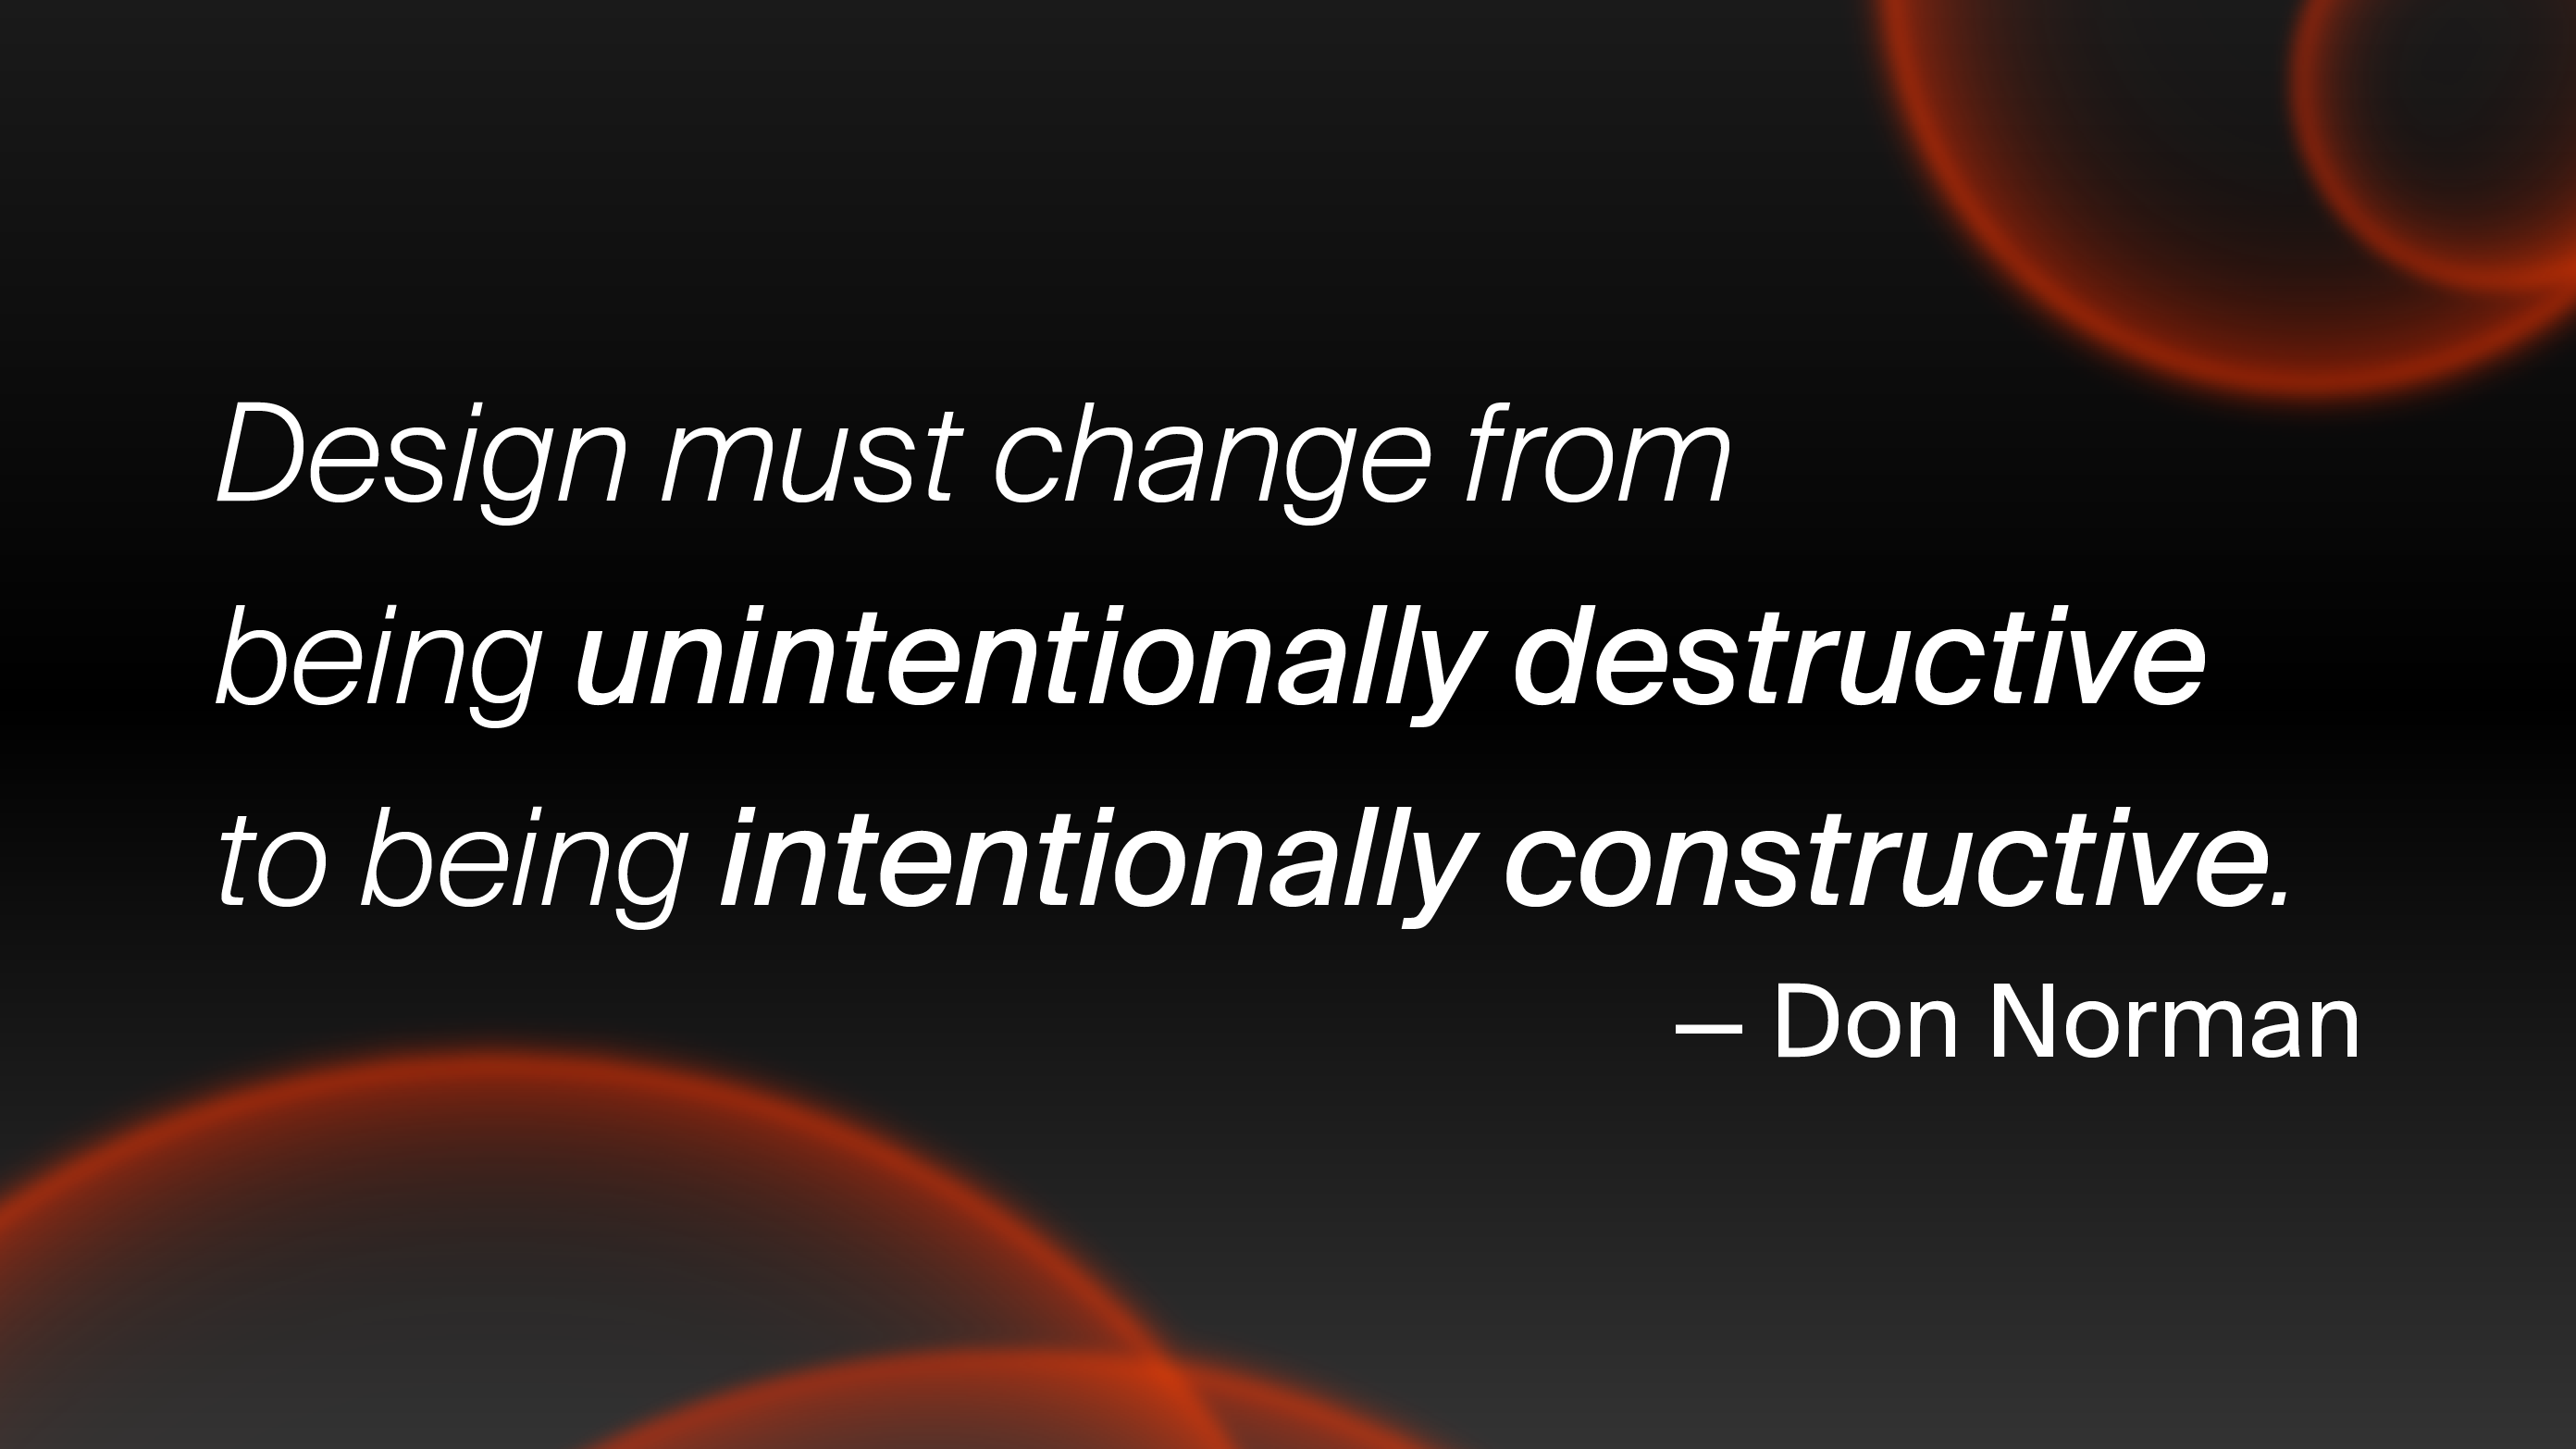 Design must change from being unintentionally destructive to being intentionally constructive - don norman